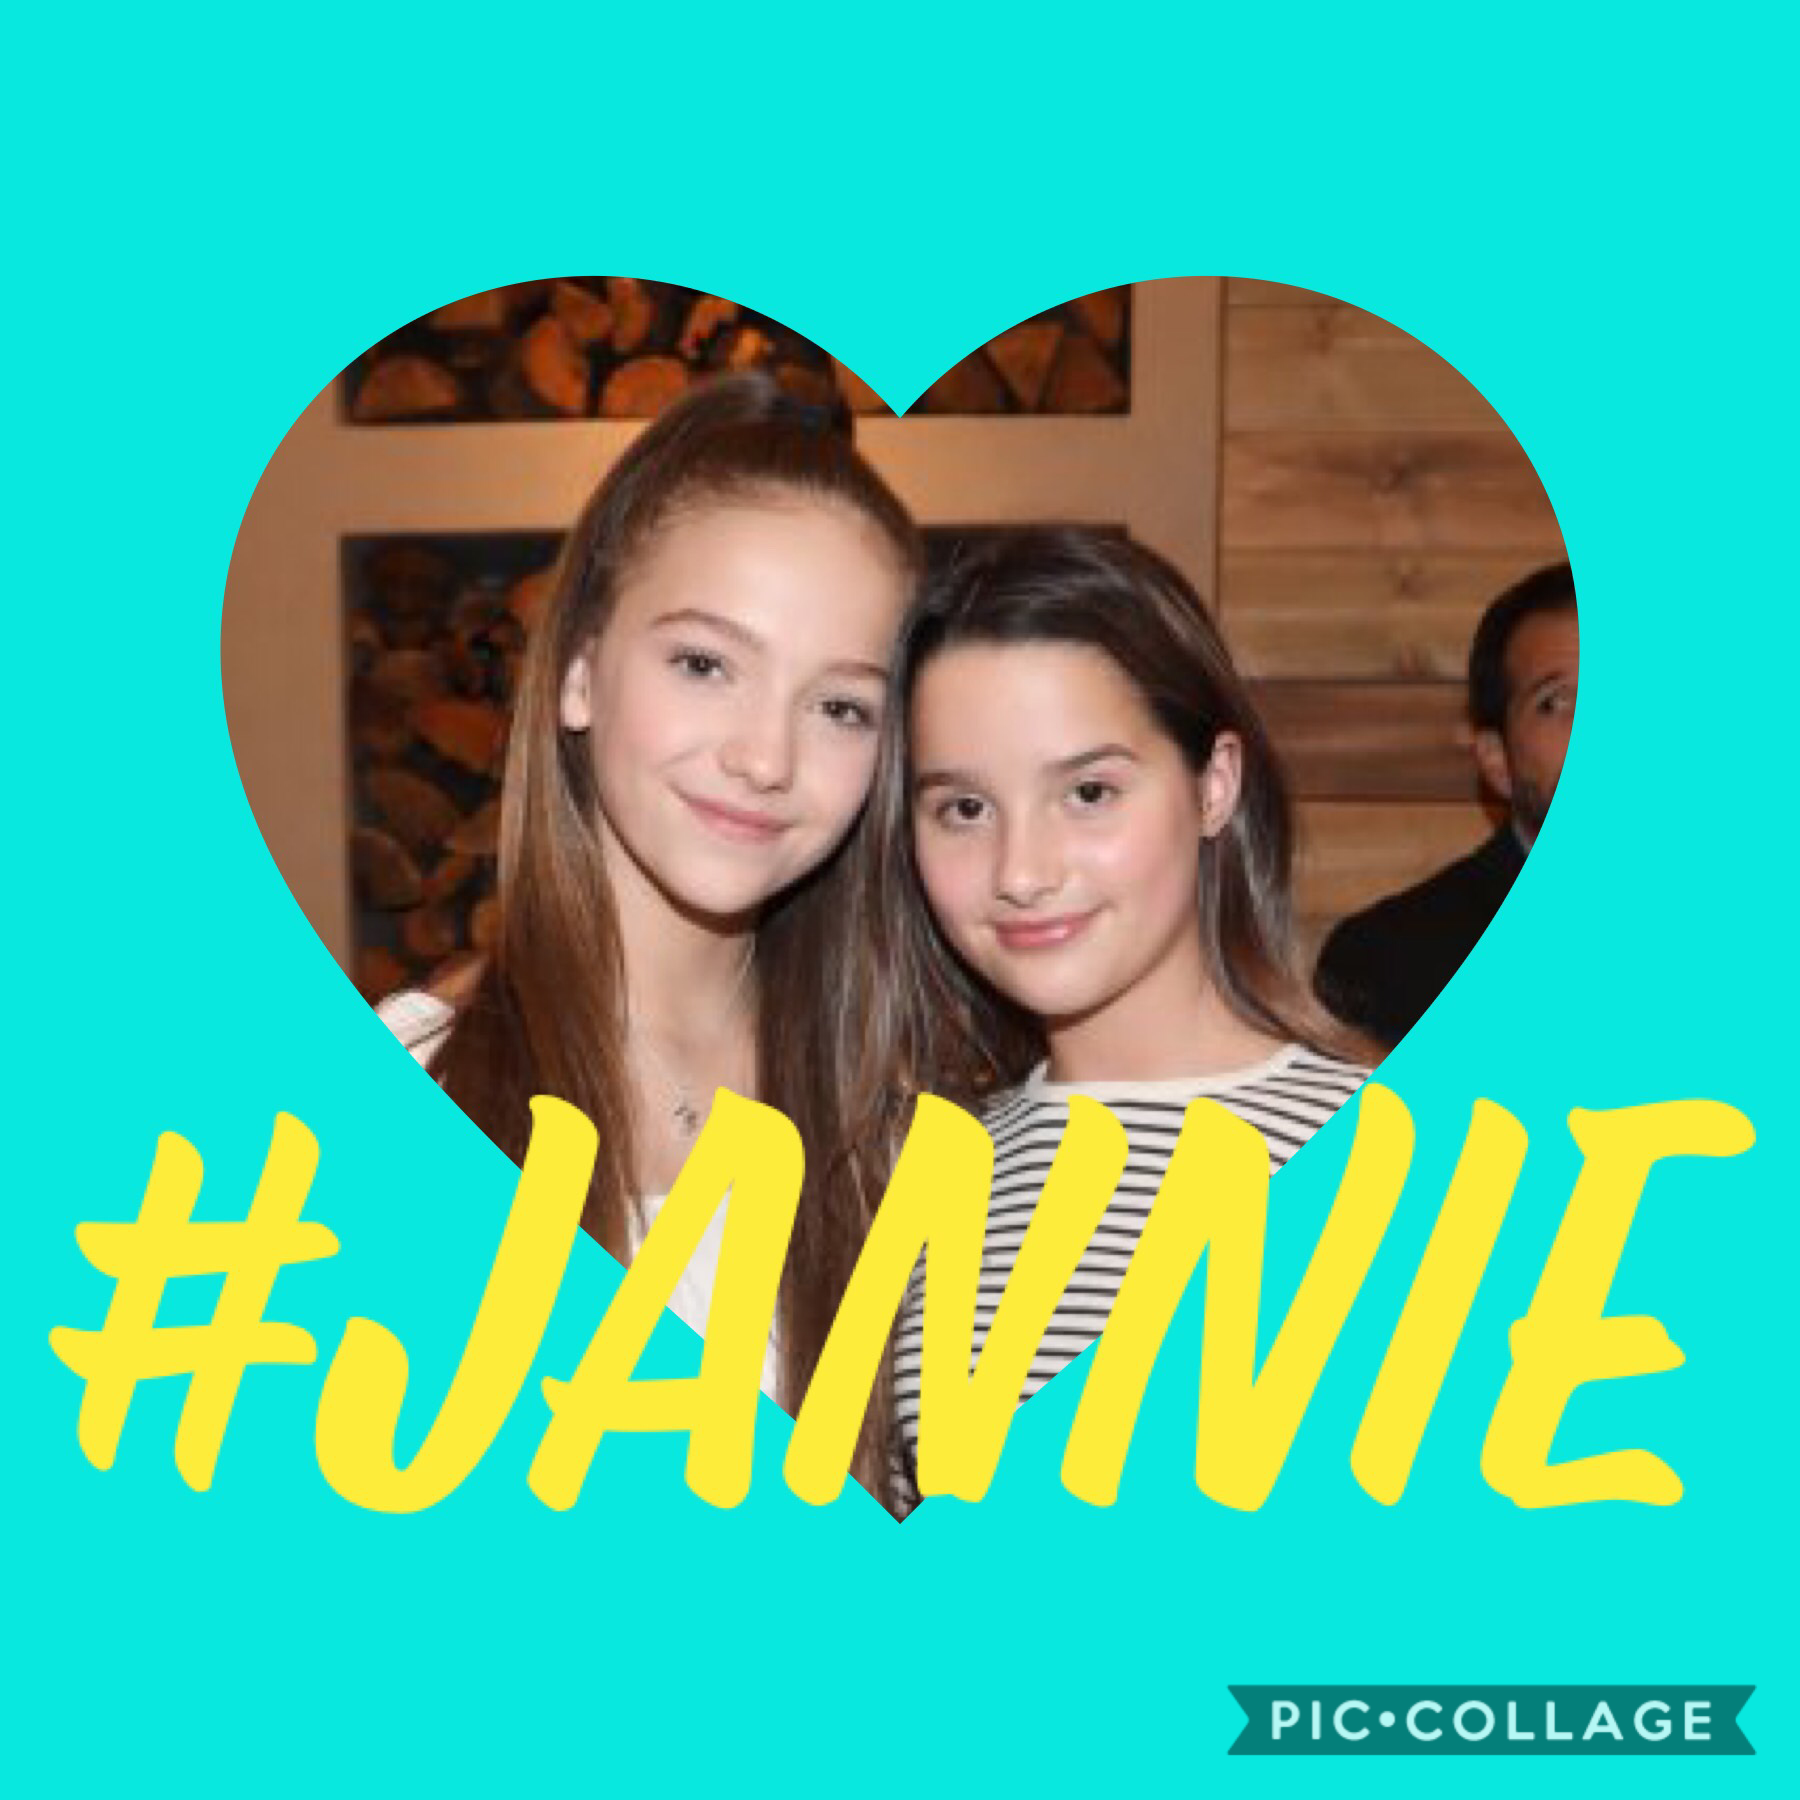 #Jannie in this post do you thing there is too much going on between the picture, the bright aqua background and the bright yellow writing?!